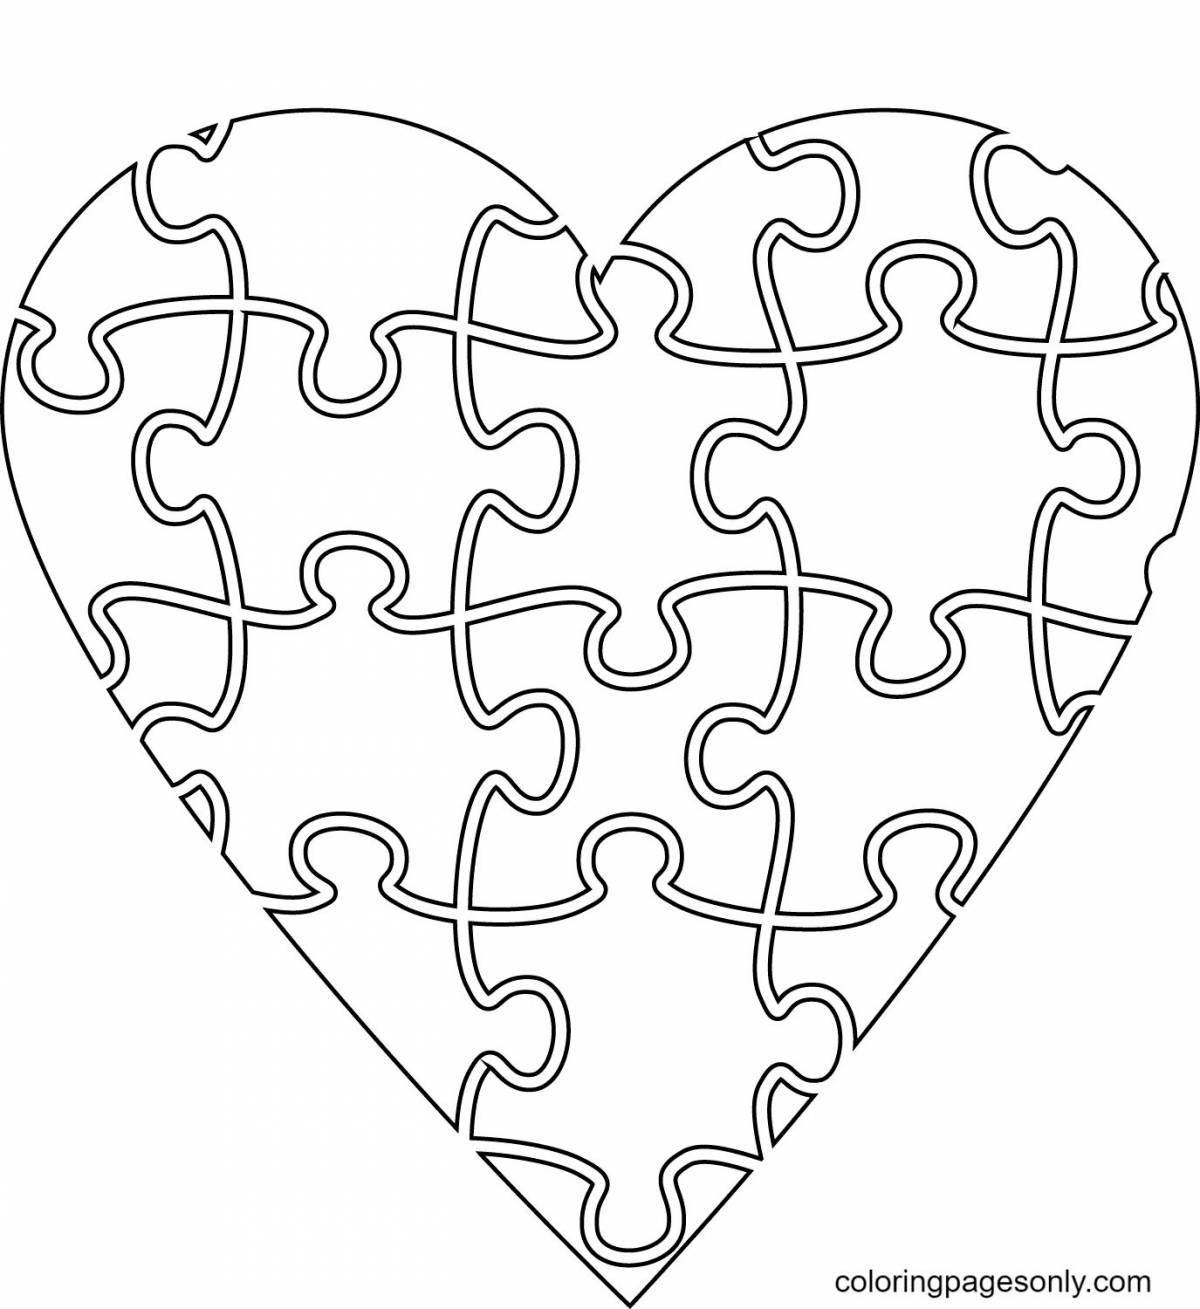 Adorable heart puzzle page